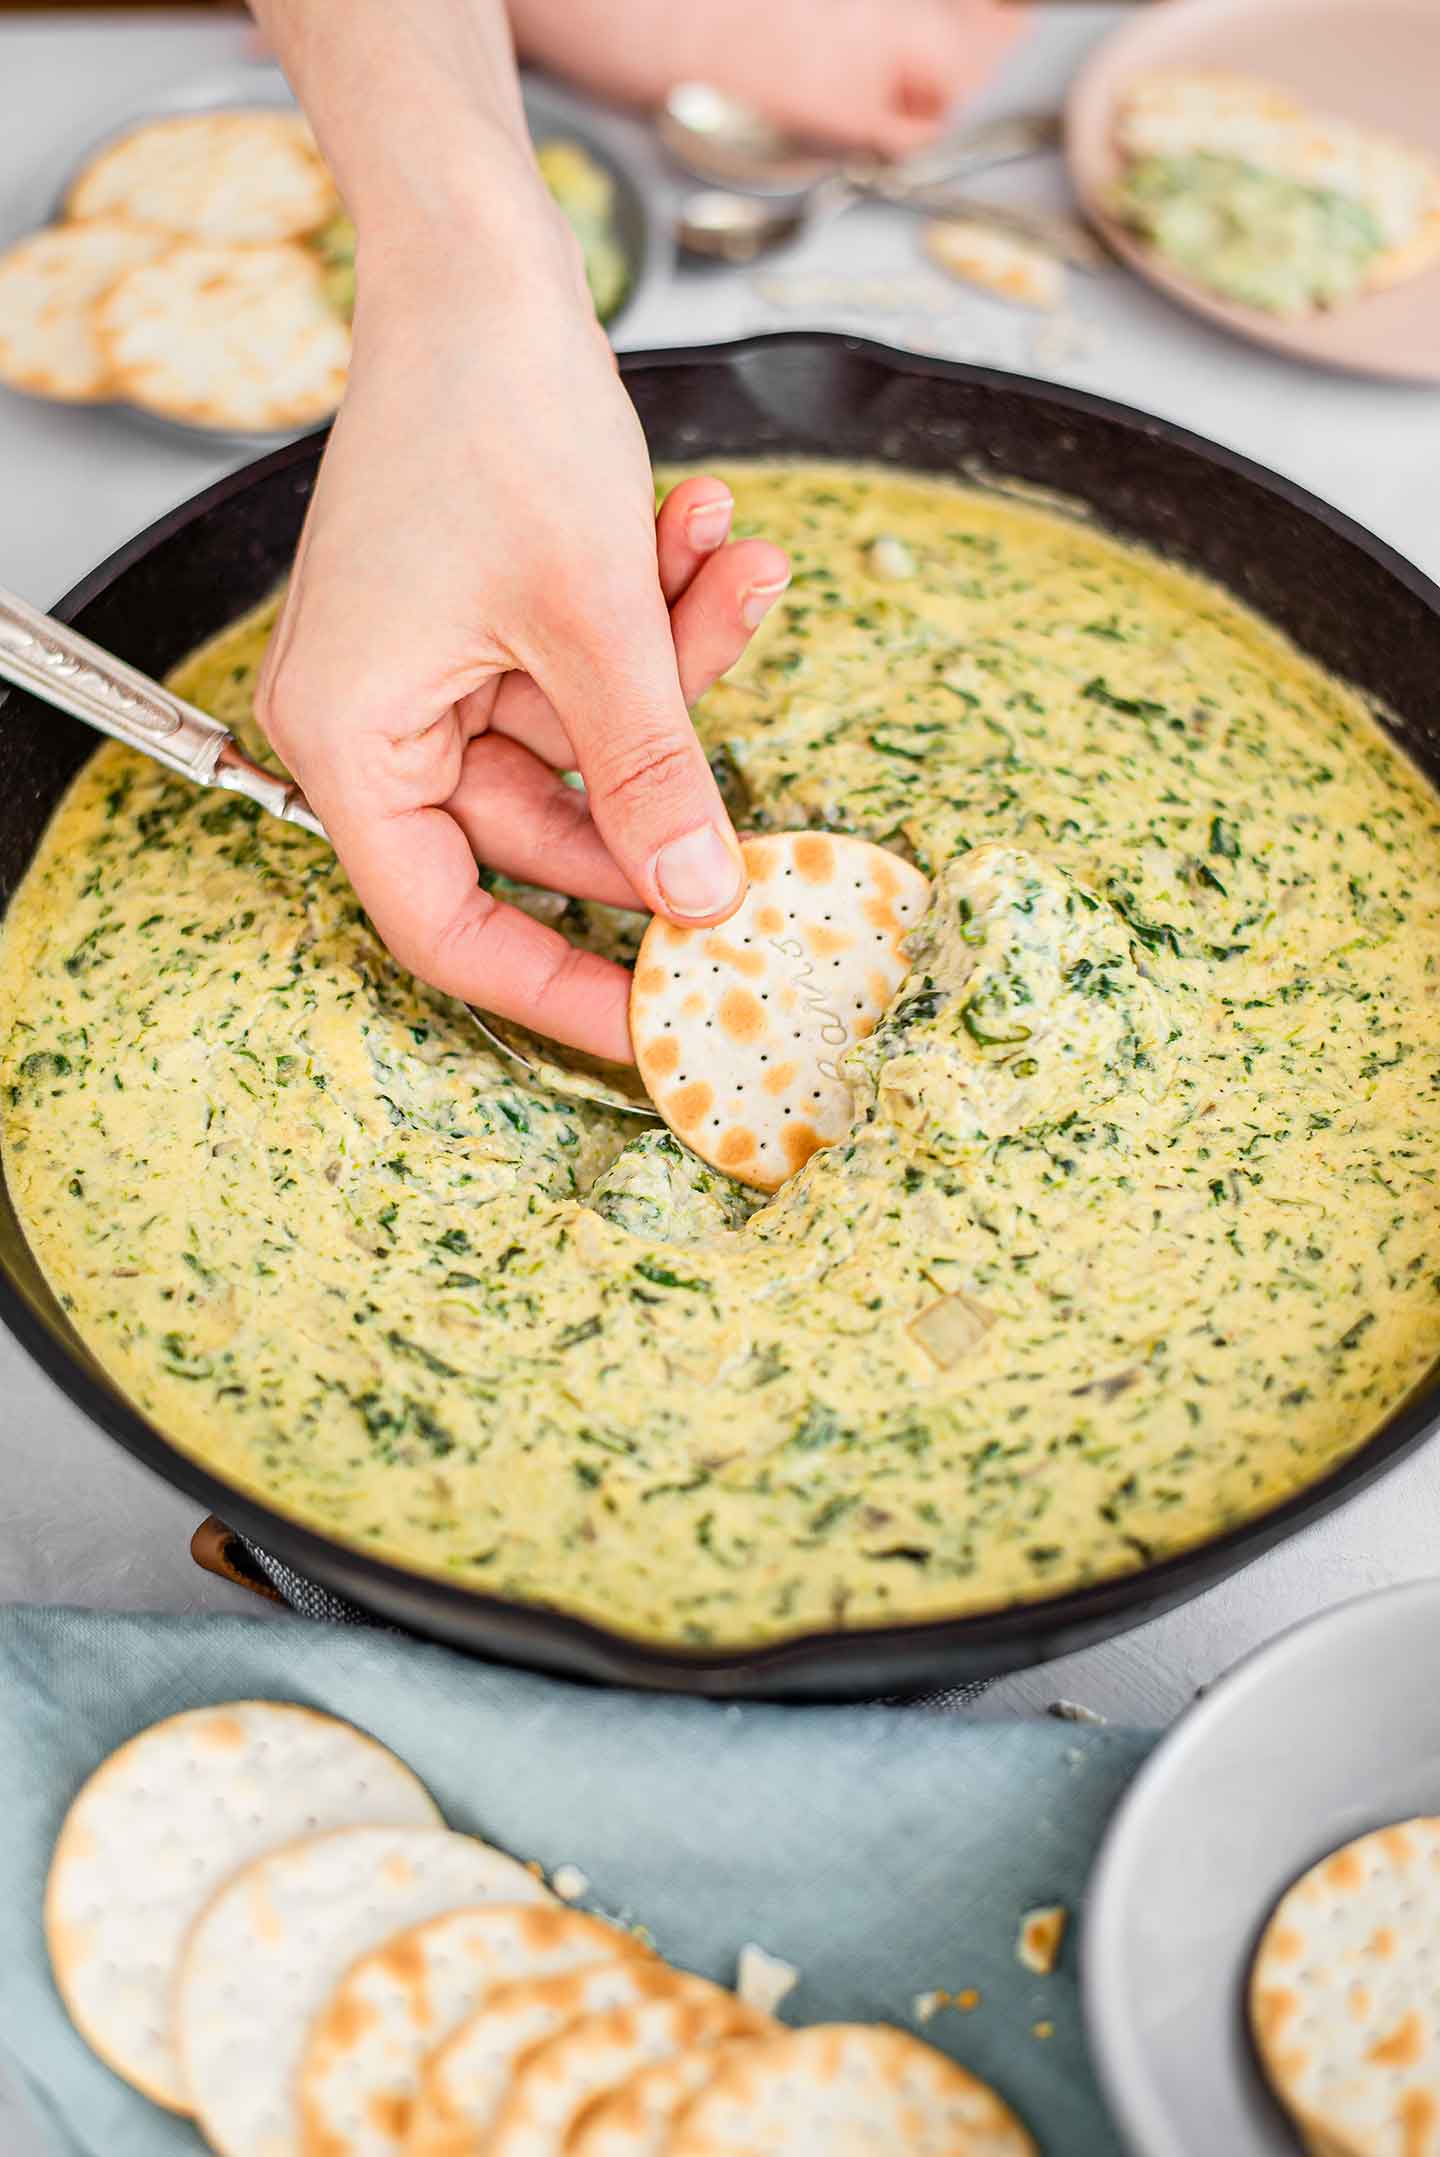 Side view of a hand dipping a cracker into the centre of a cast iron skillet filled with creamy spinach artichoke white bean dip.